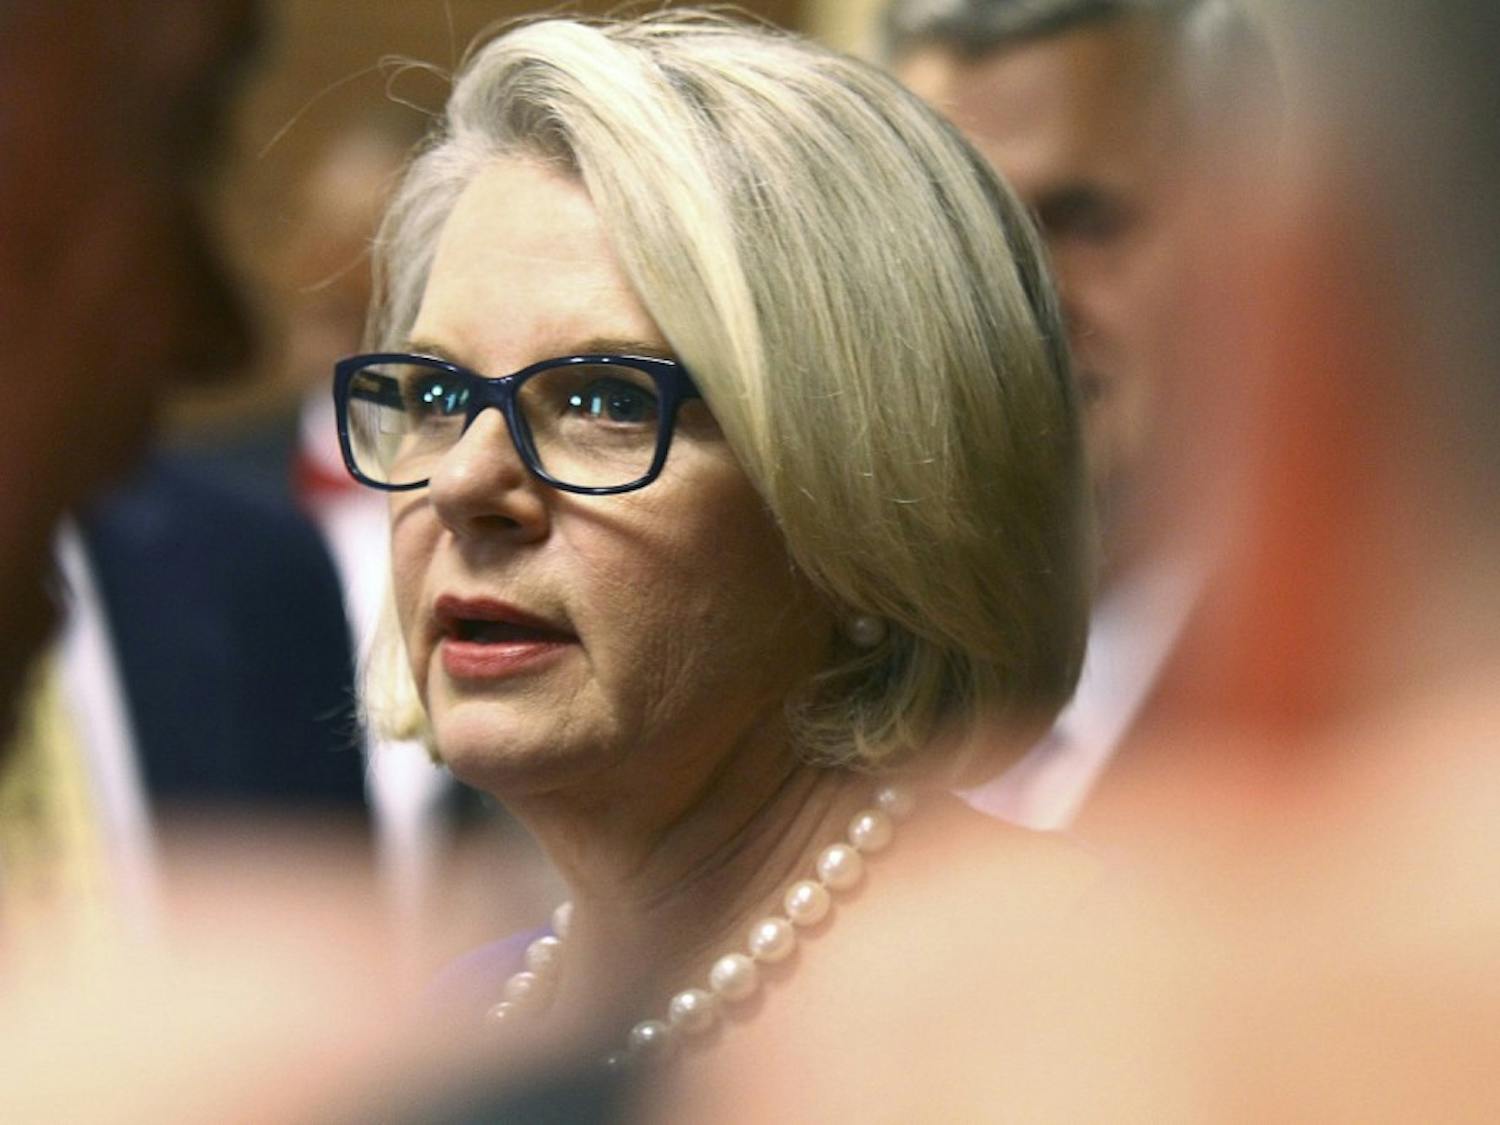 UNC-system president Margaret Spellings may leave the system soon, according to multiple sources.